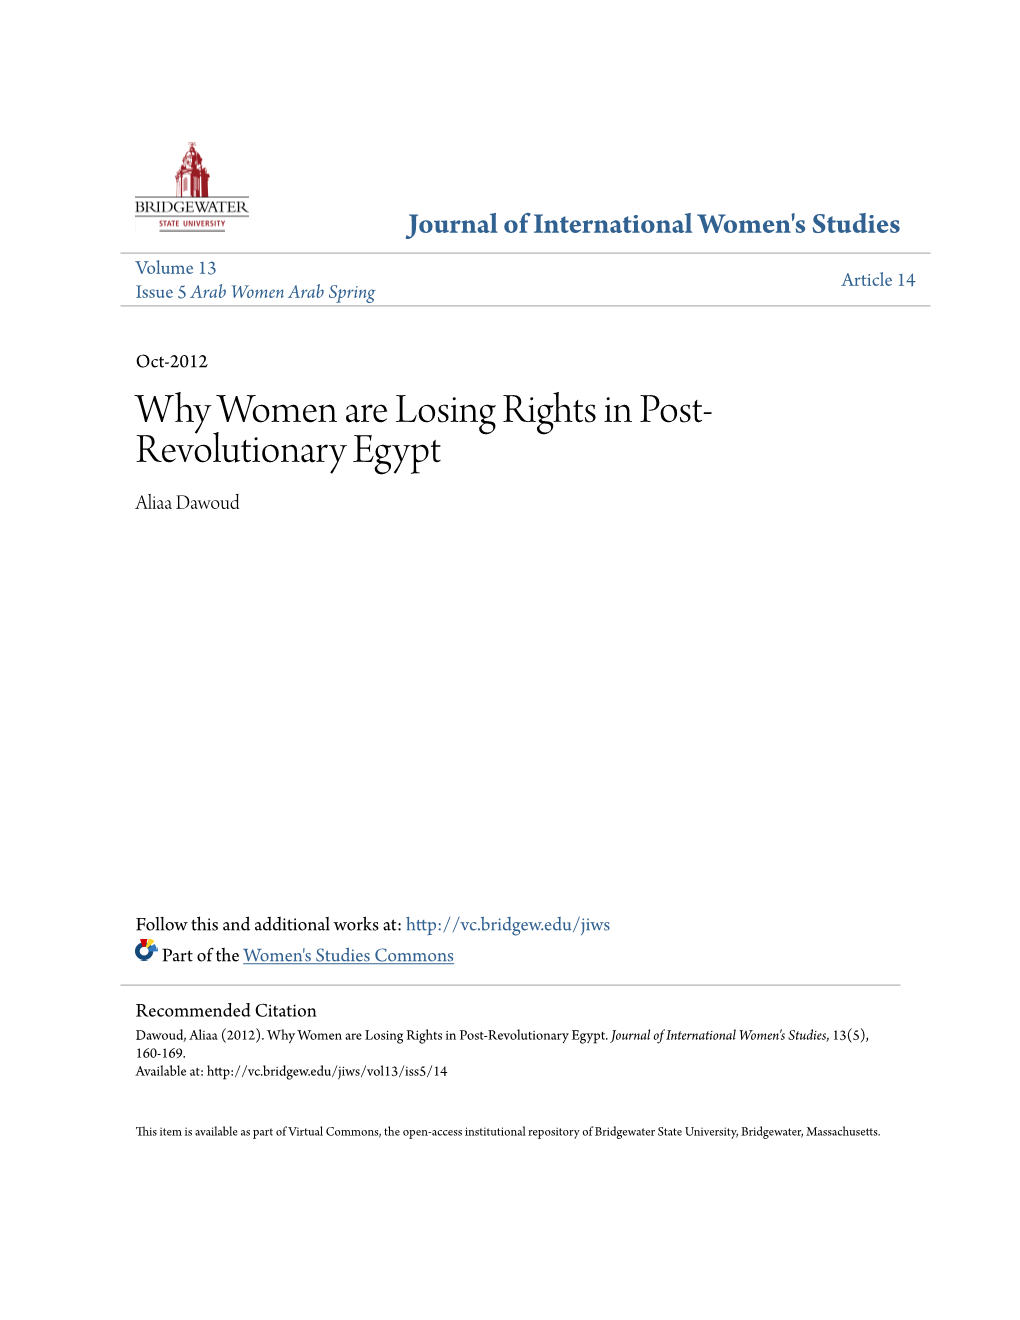 Why Women Are Losing Rights in Post-Revolutionary Egypt